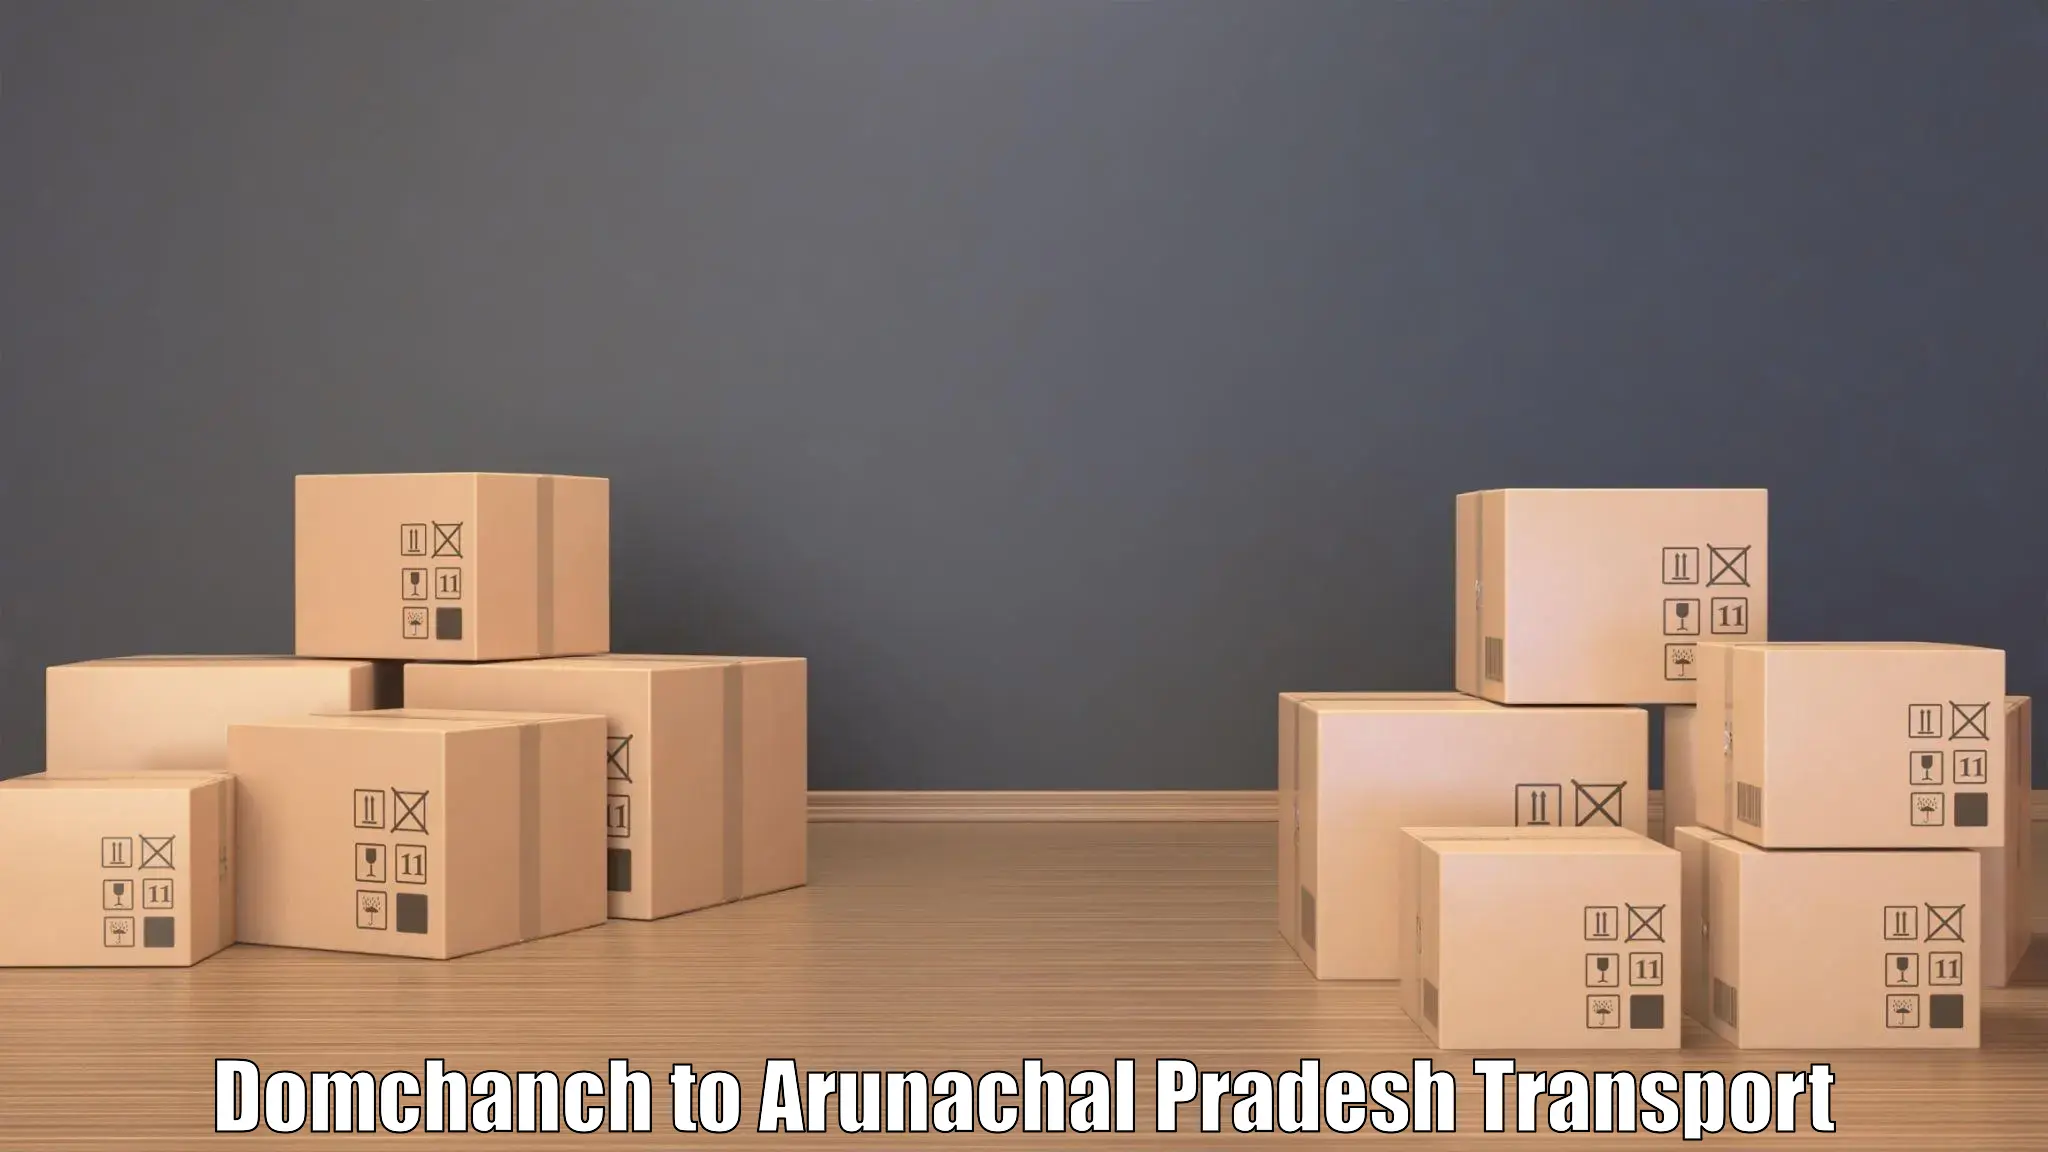 Truck transport companies in India Domchanch to Tirap